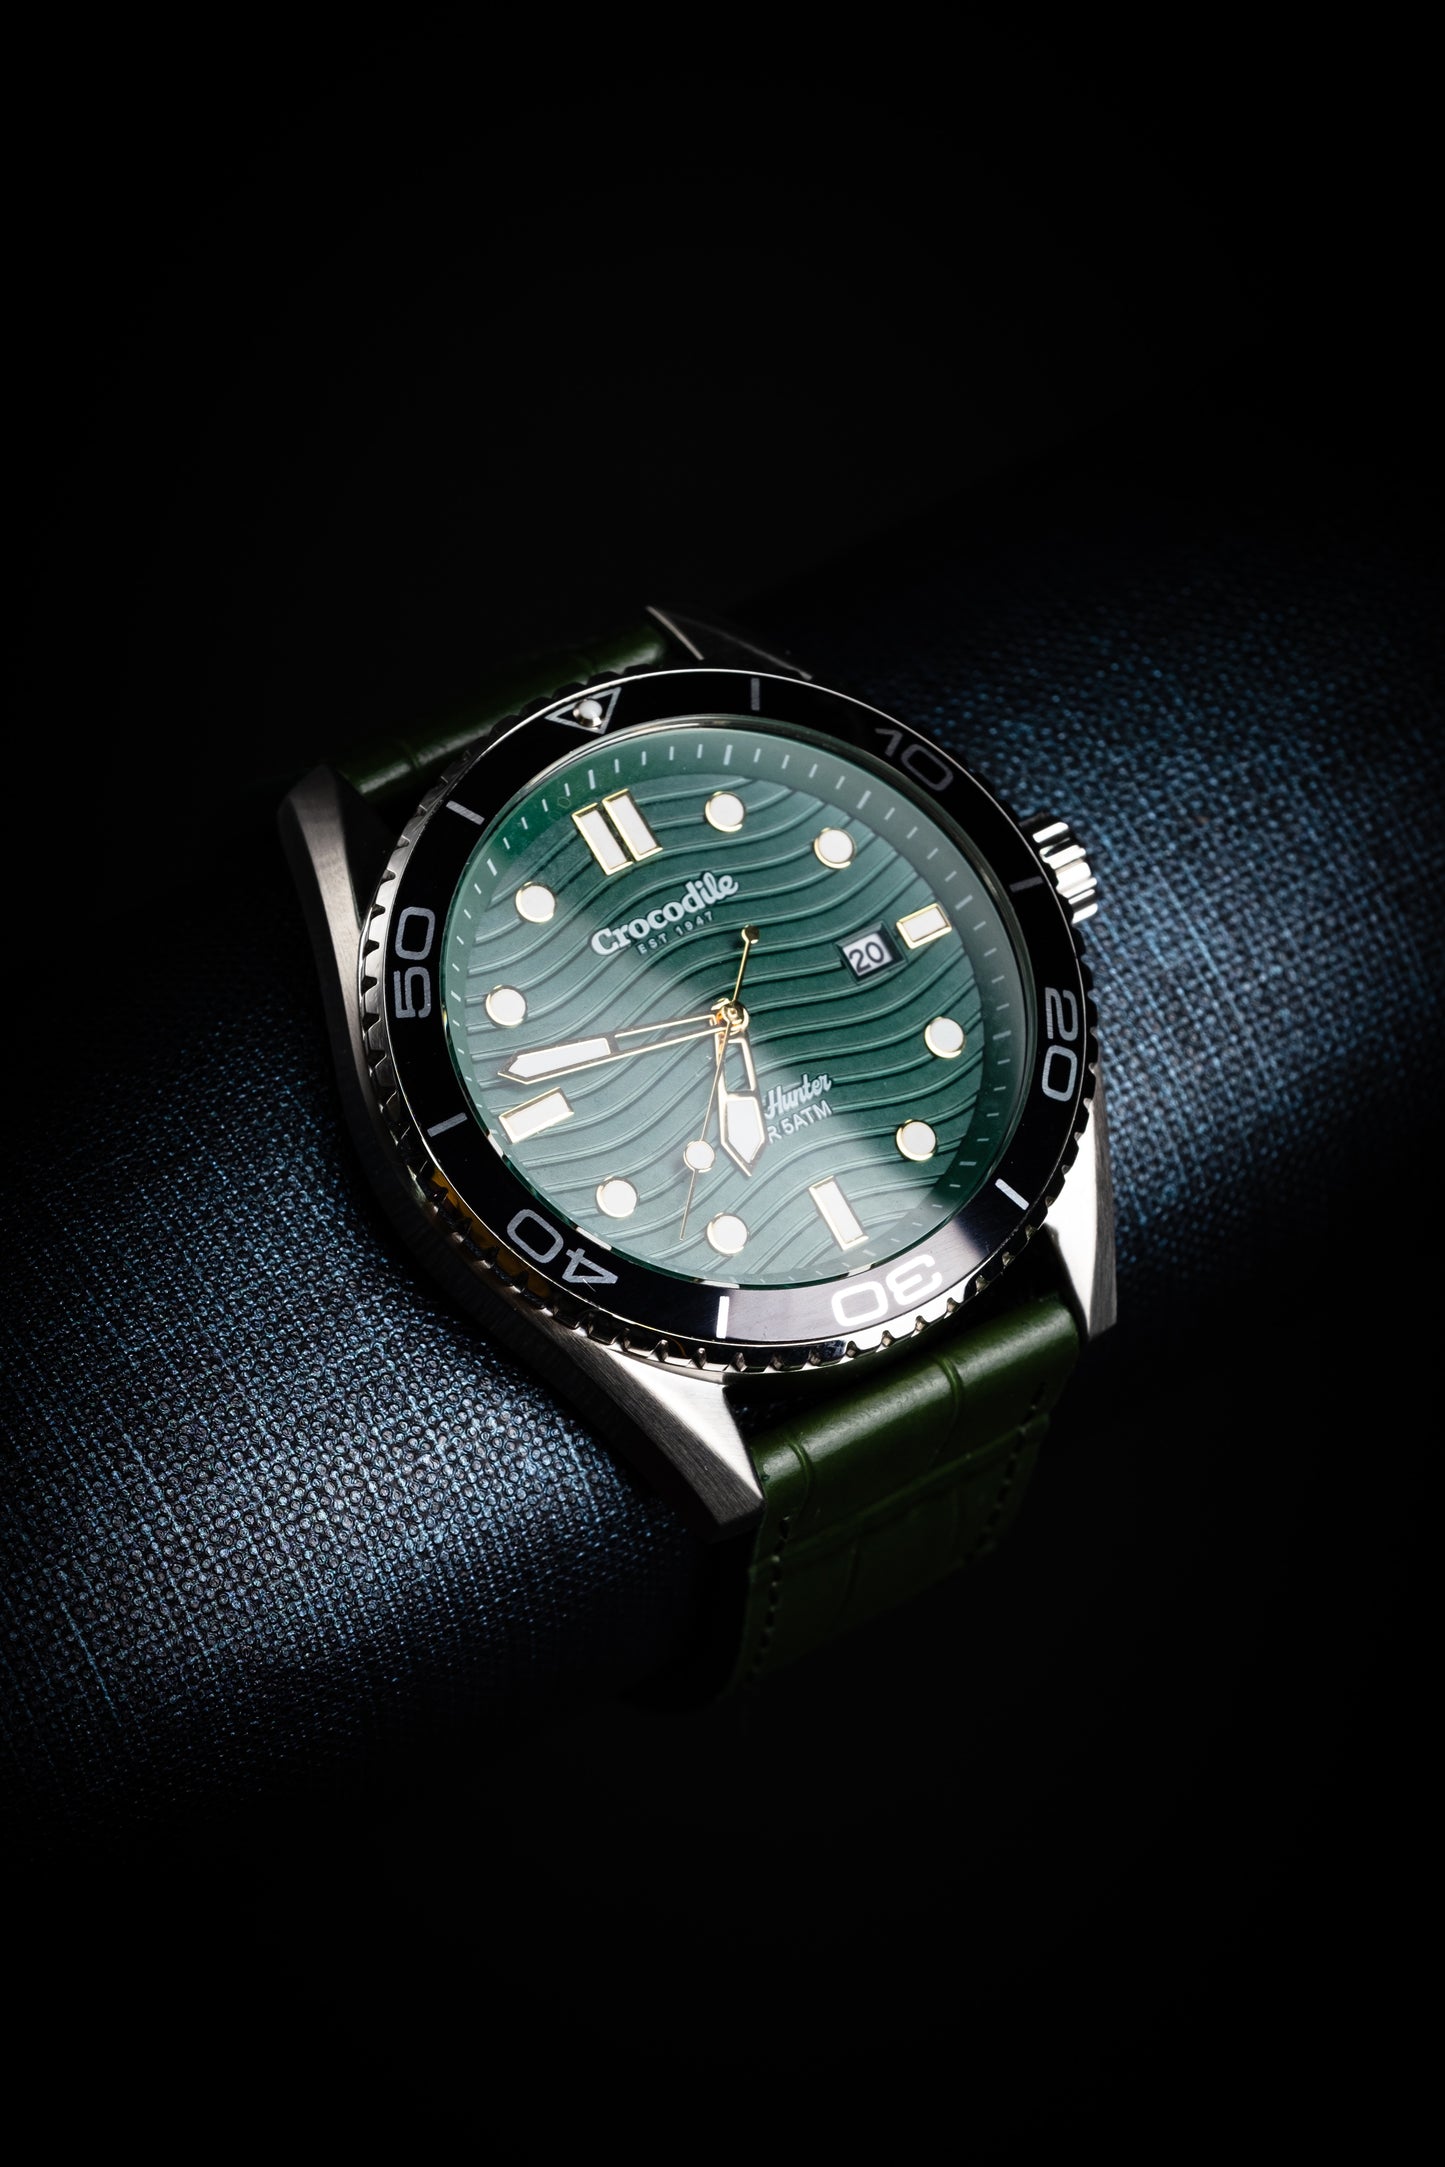 Dress Watch With Green Dial